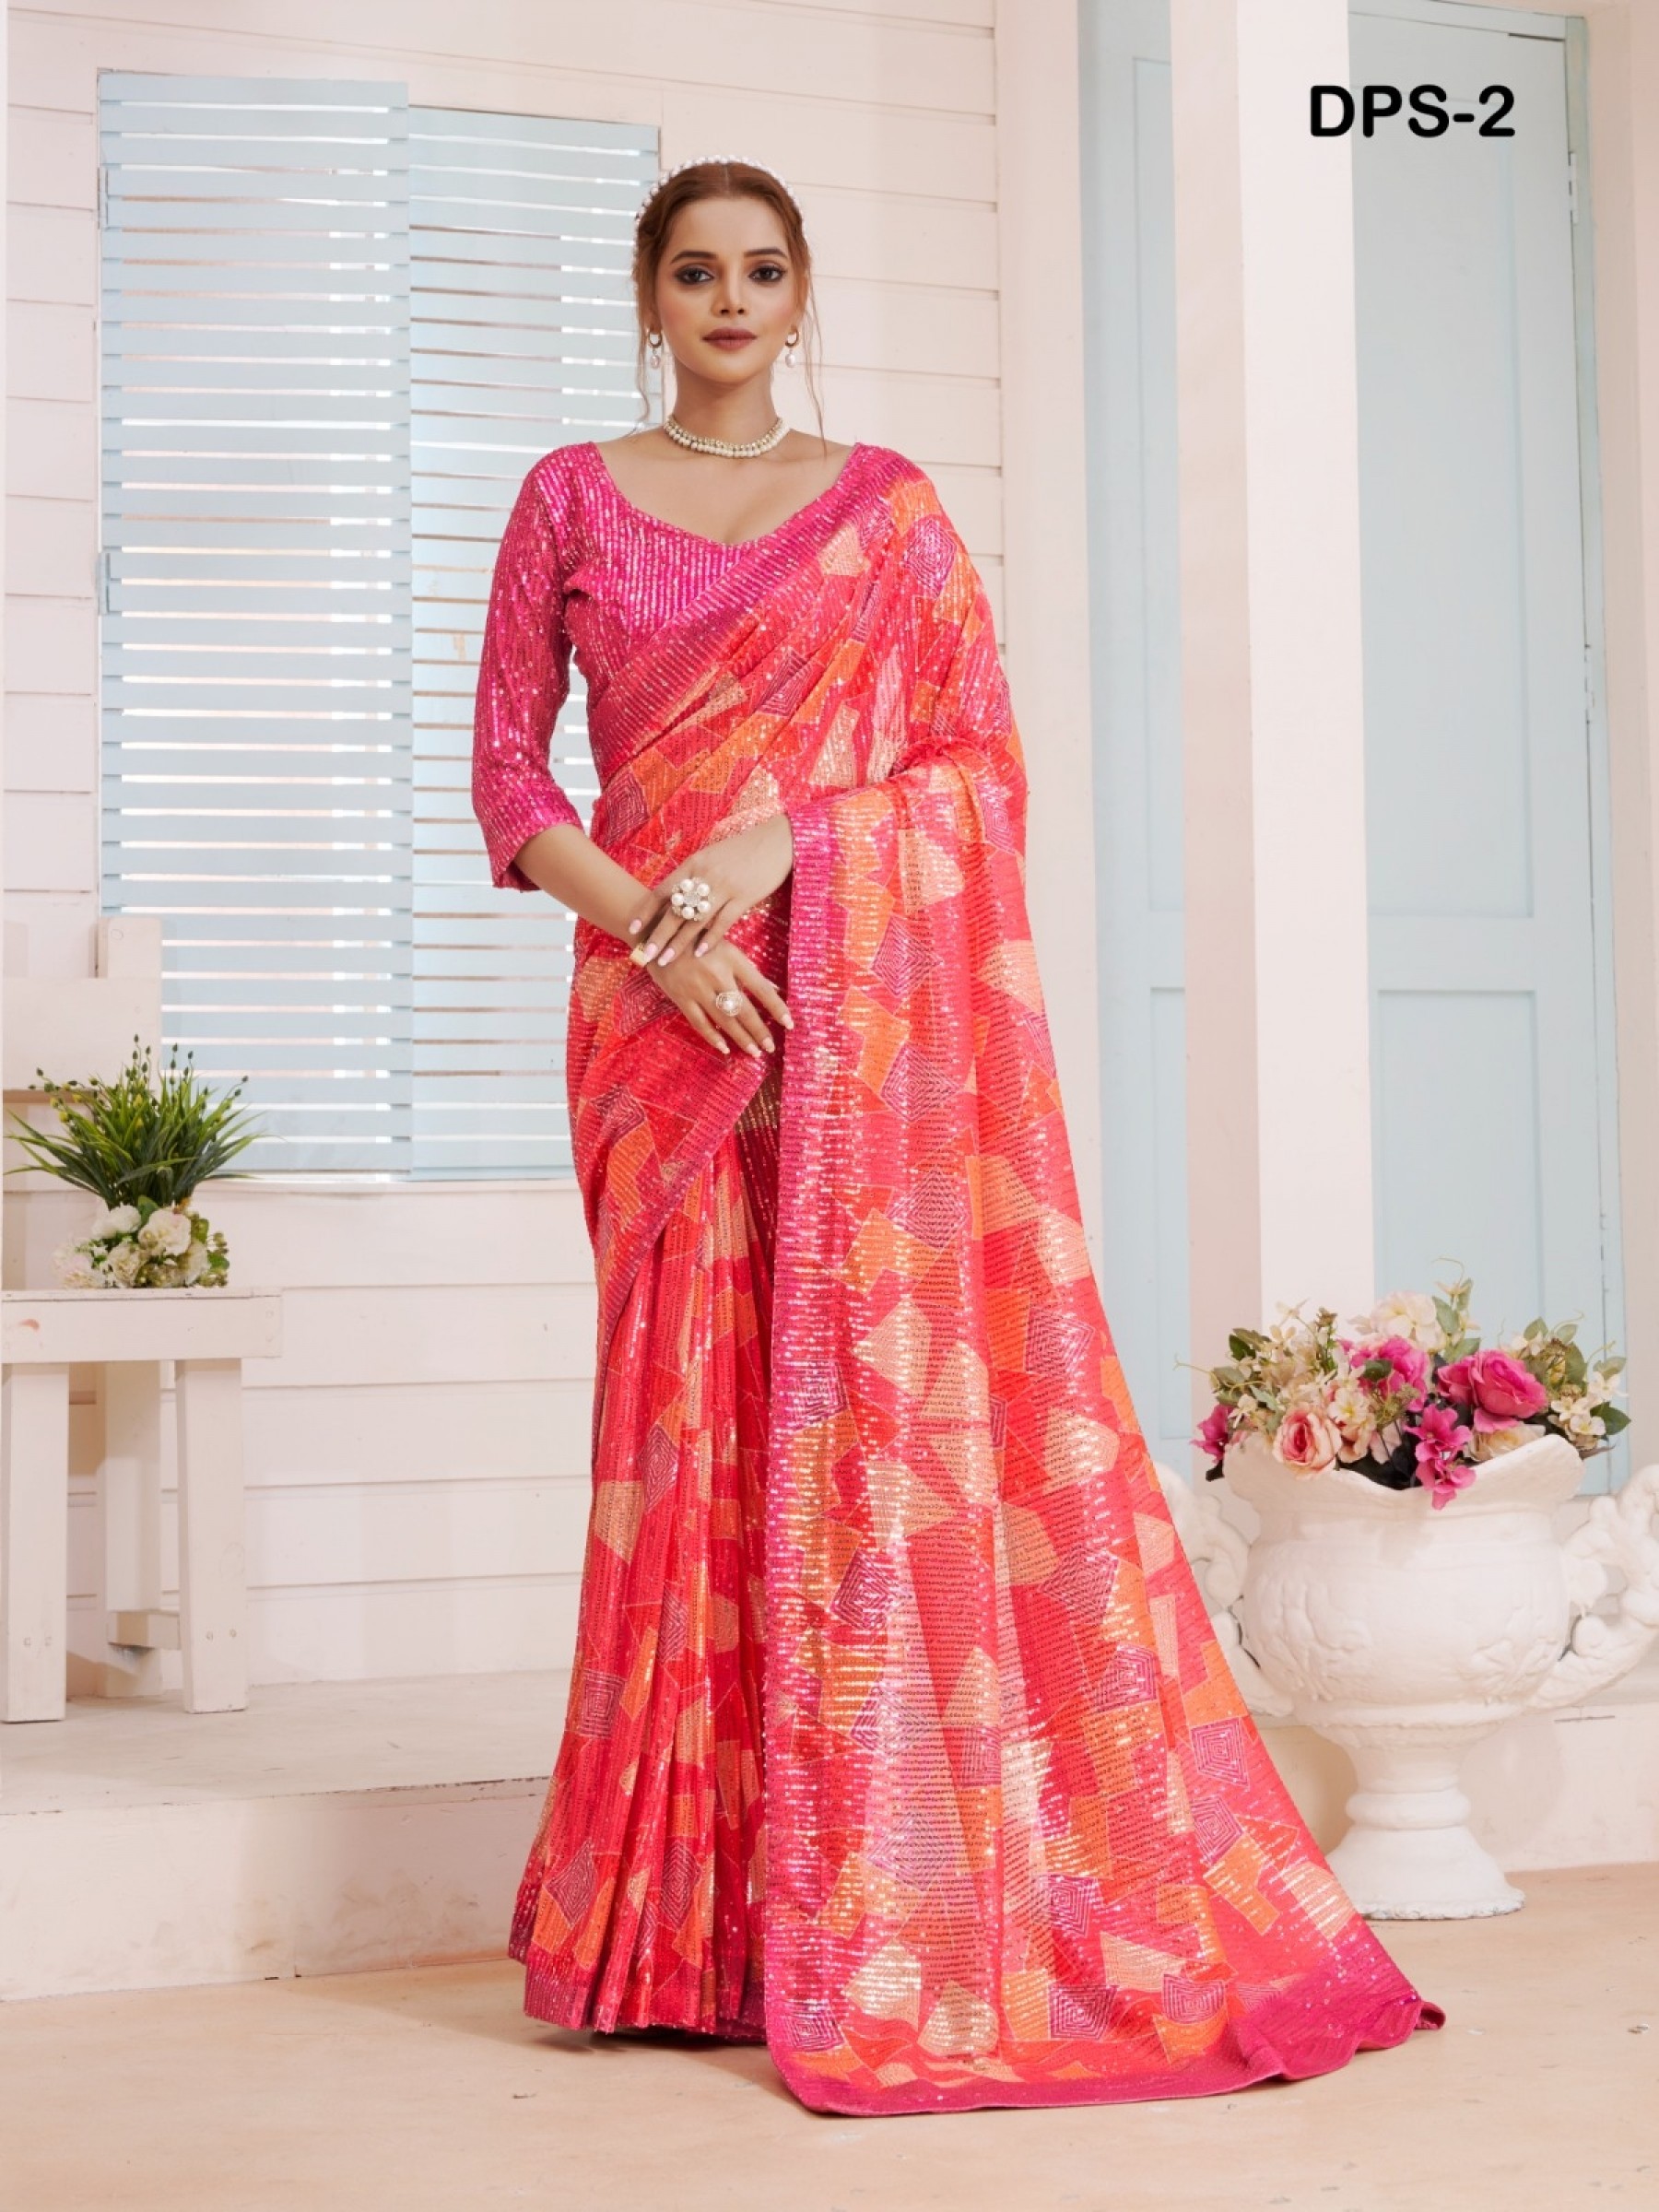 Imported  Fabric Party Wear  Saree In Pink Color With Embroidery Work